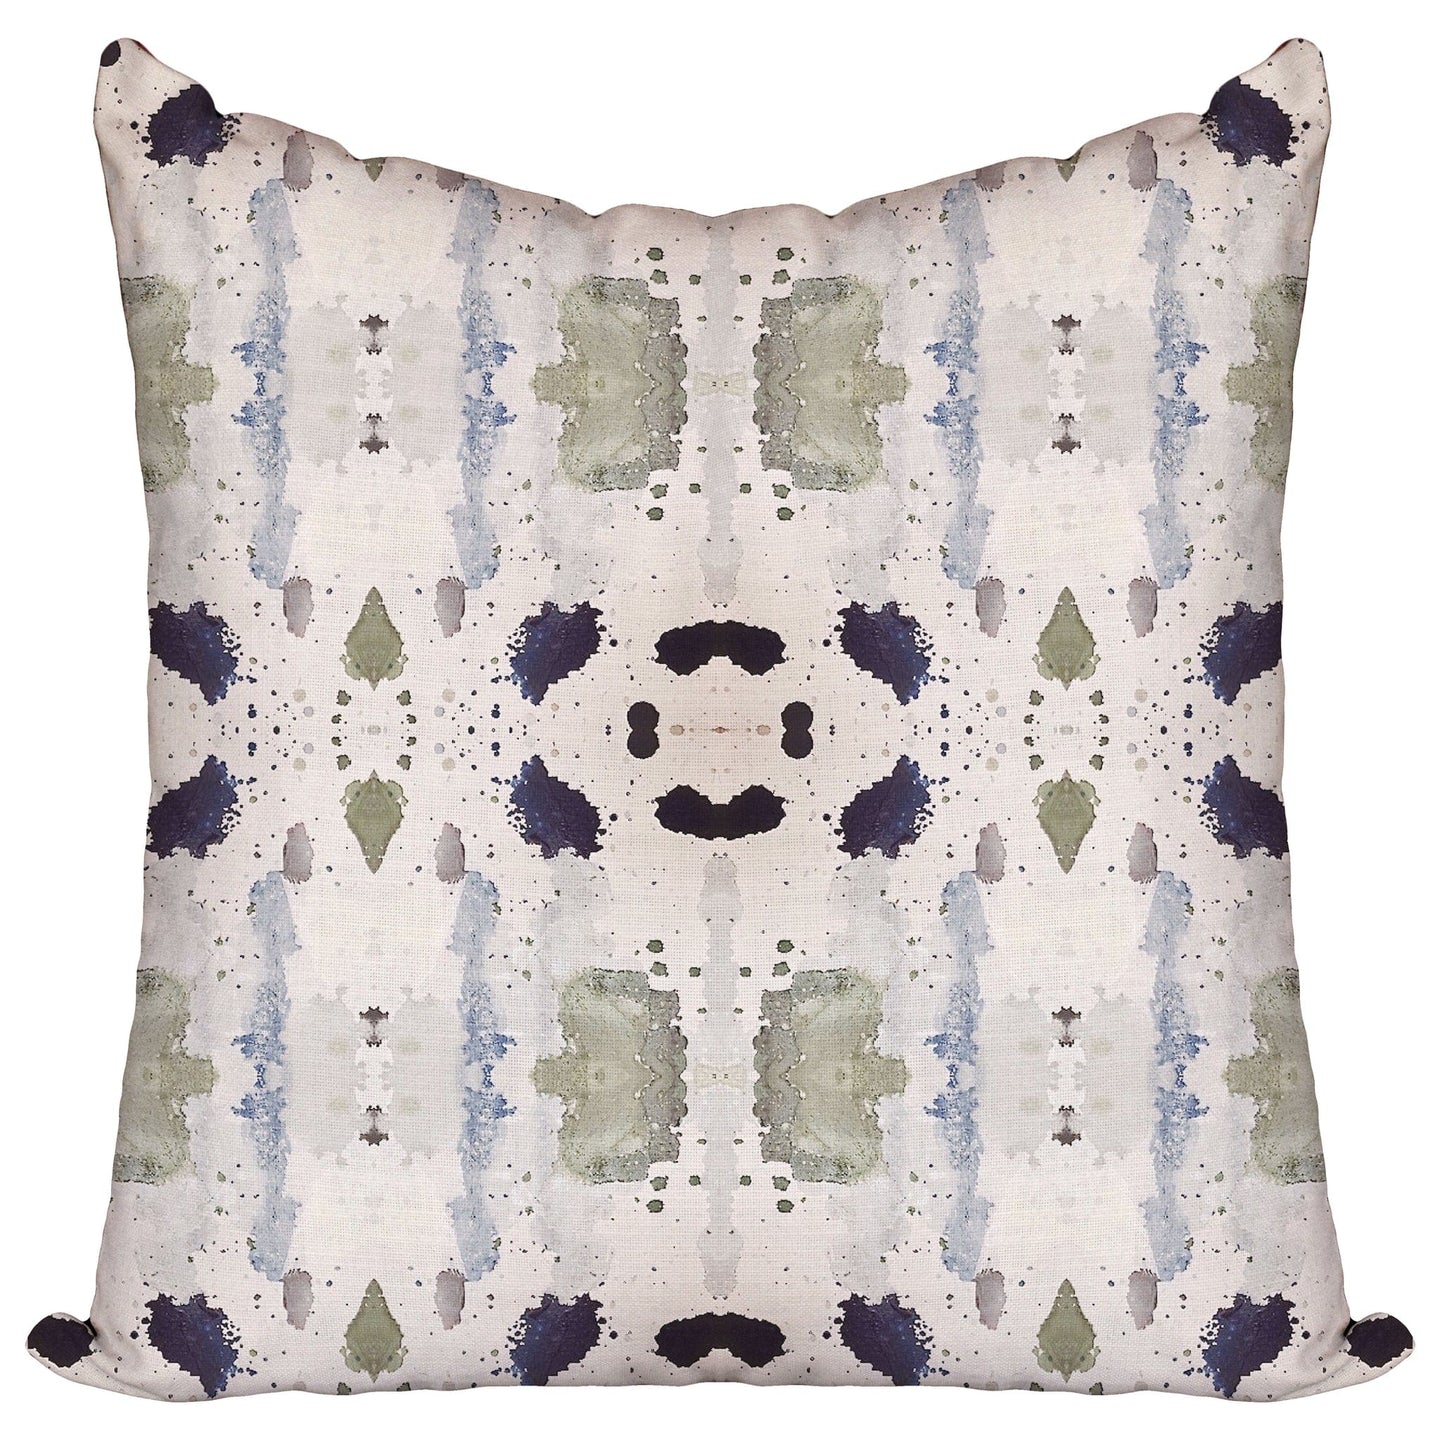 Windy O'Connor Mossy Blues Pillow Pillows